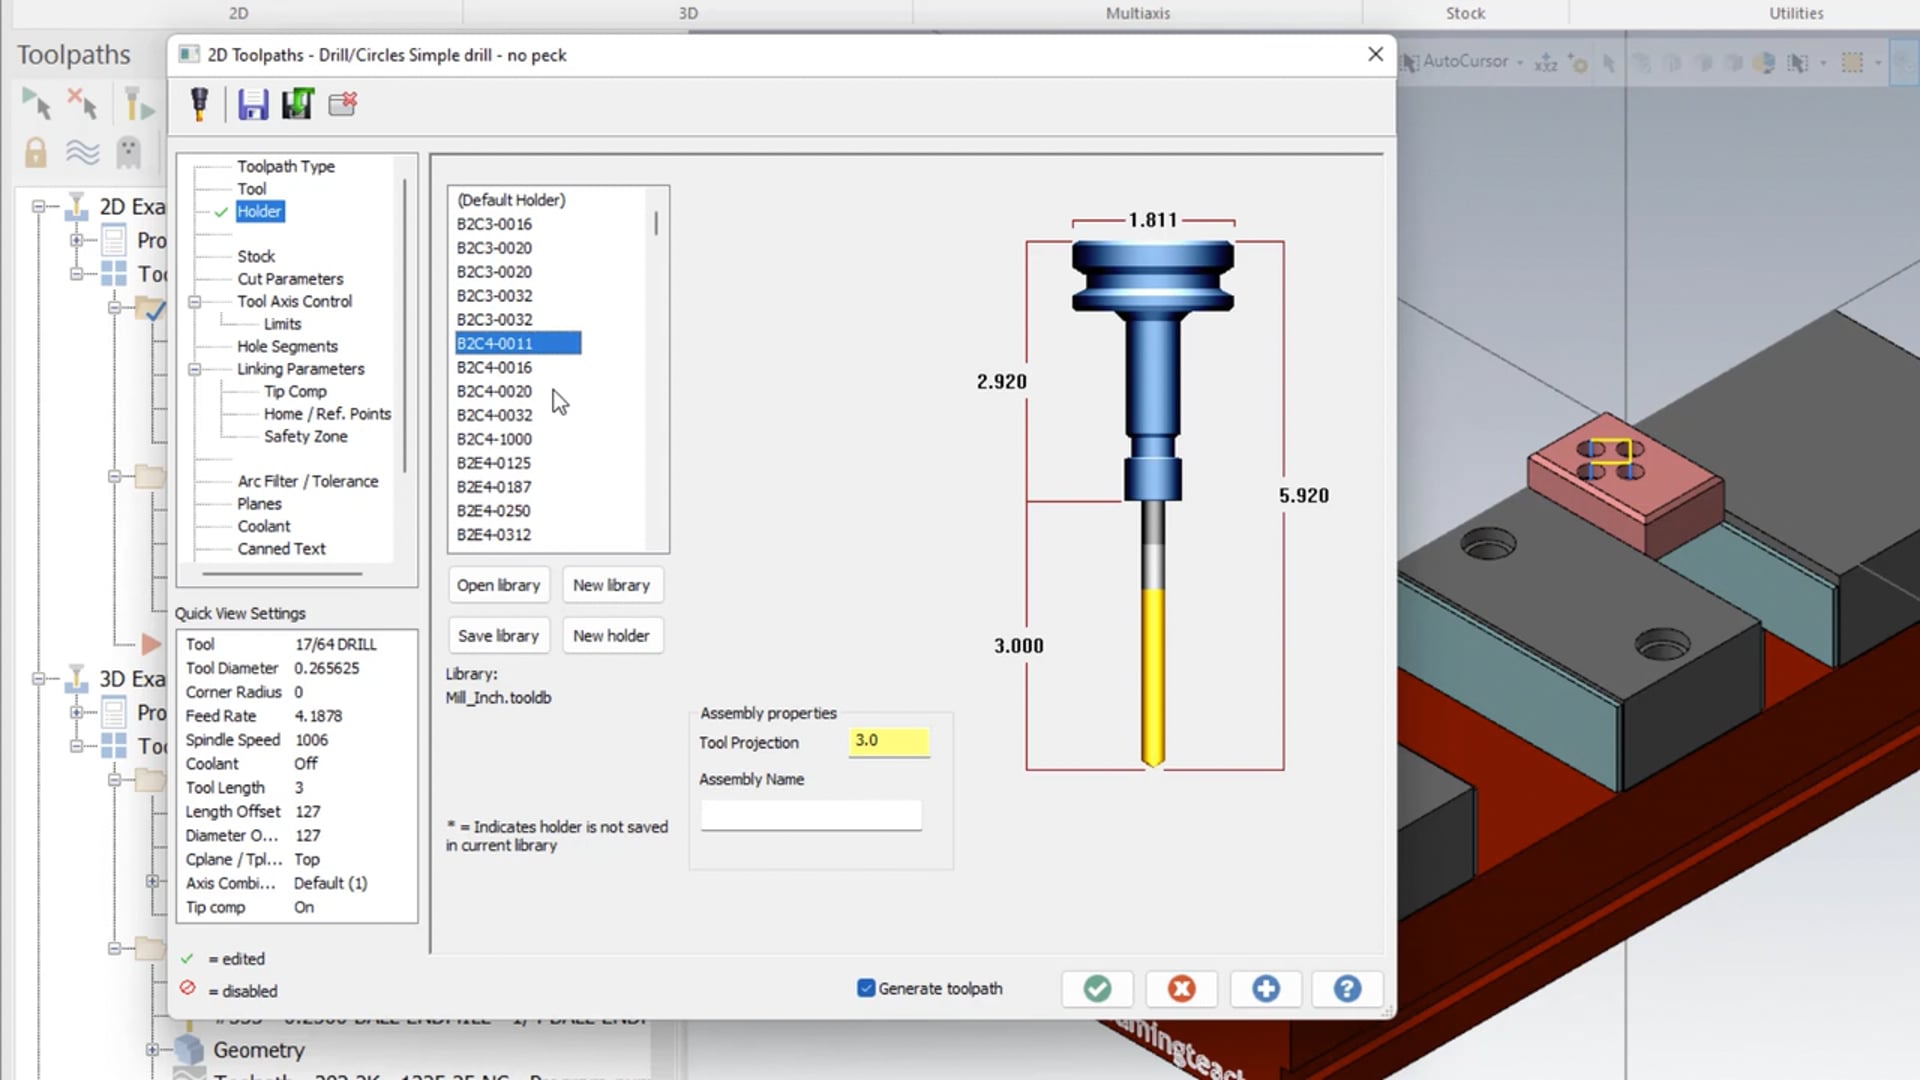 Toolpath parameters - Mill/Router Holders page